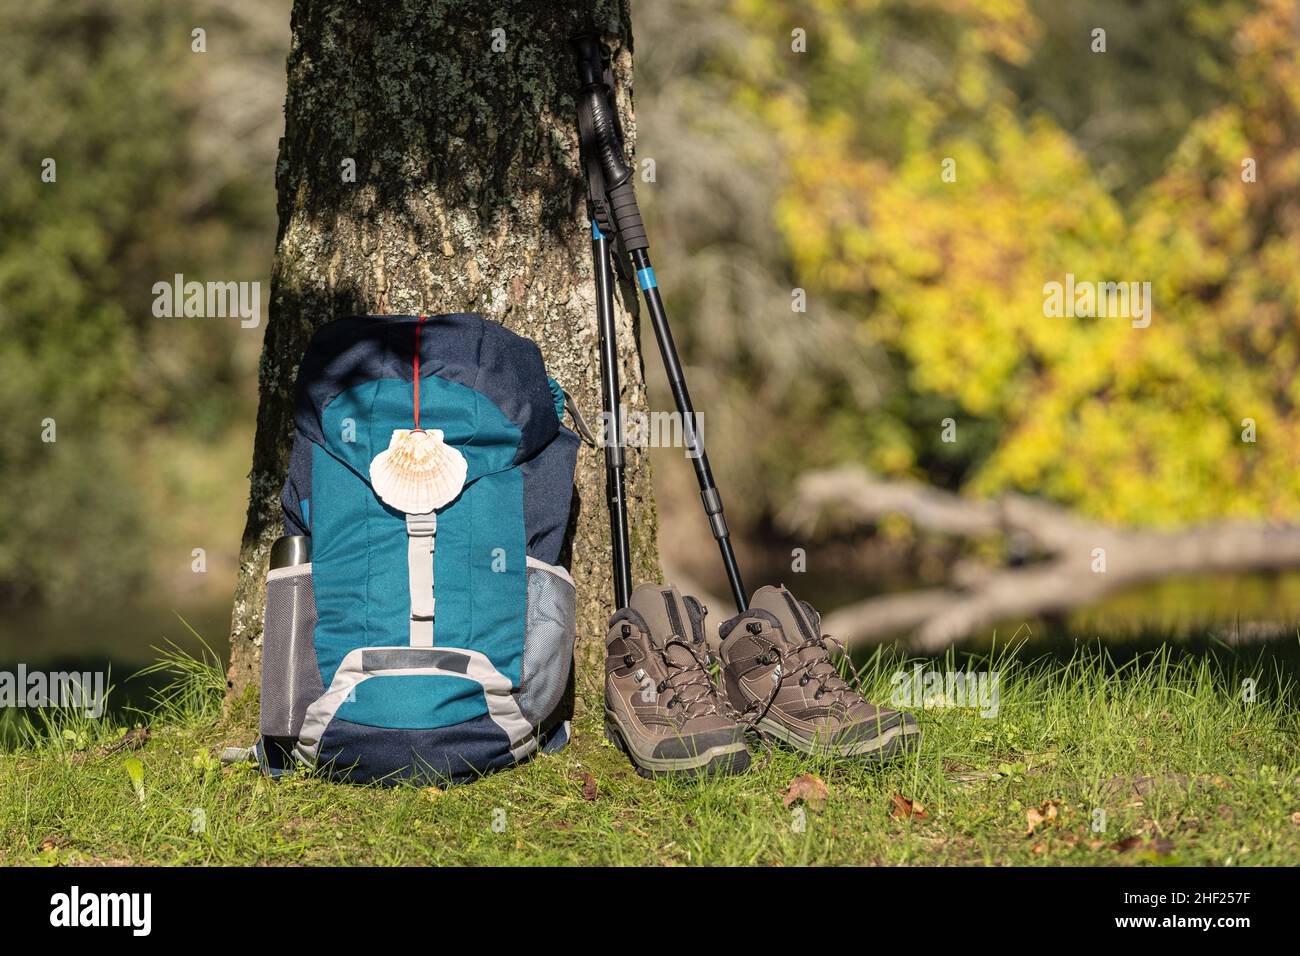 Backpack leaning against a tree, boots and accessories of a pilgrim on his way to Santiago de Compostela. Camino de Santiago concept Stock Photo